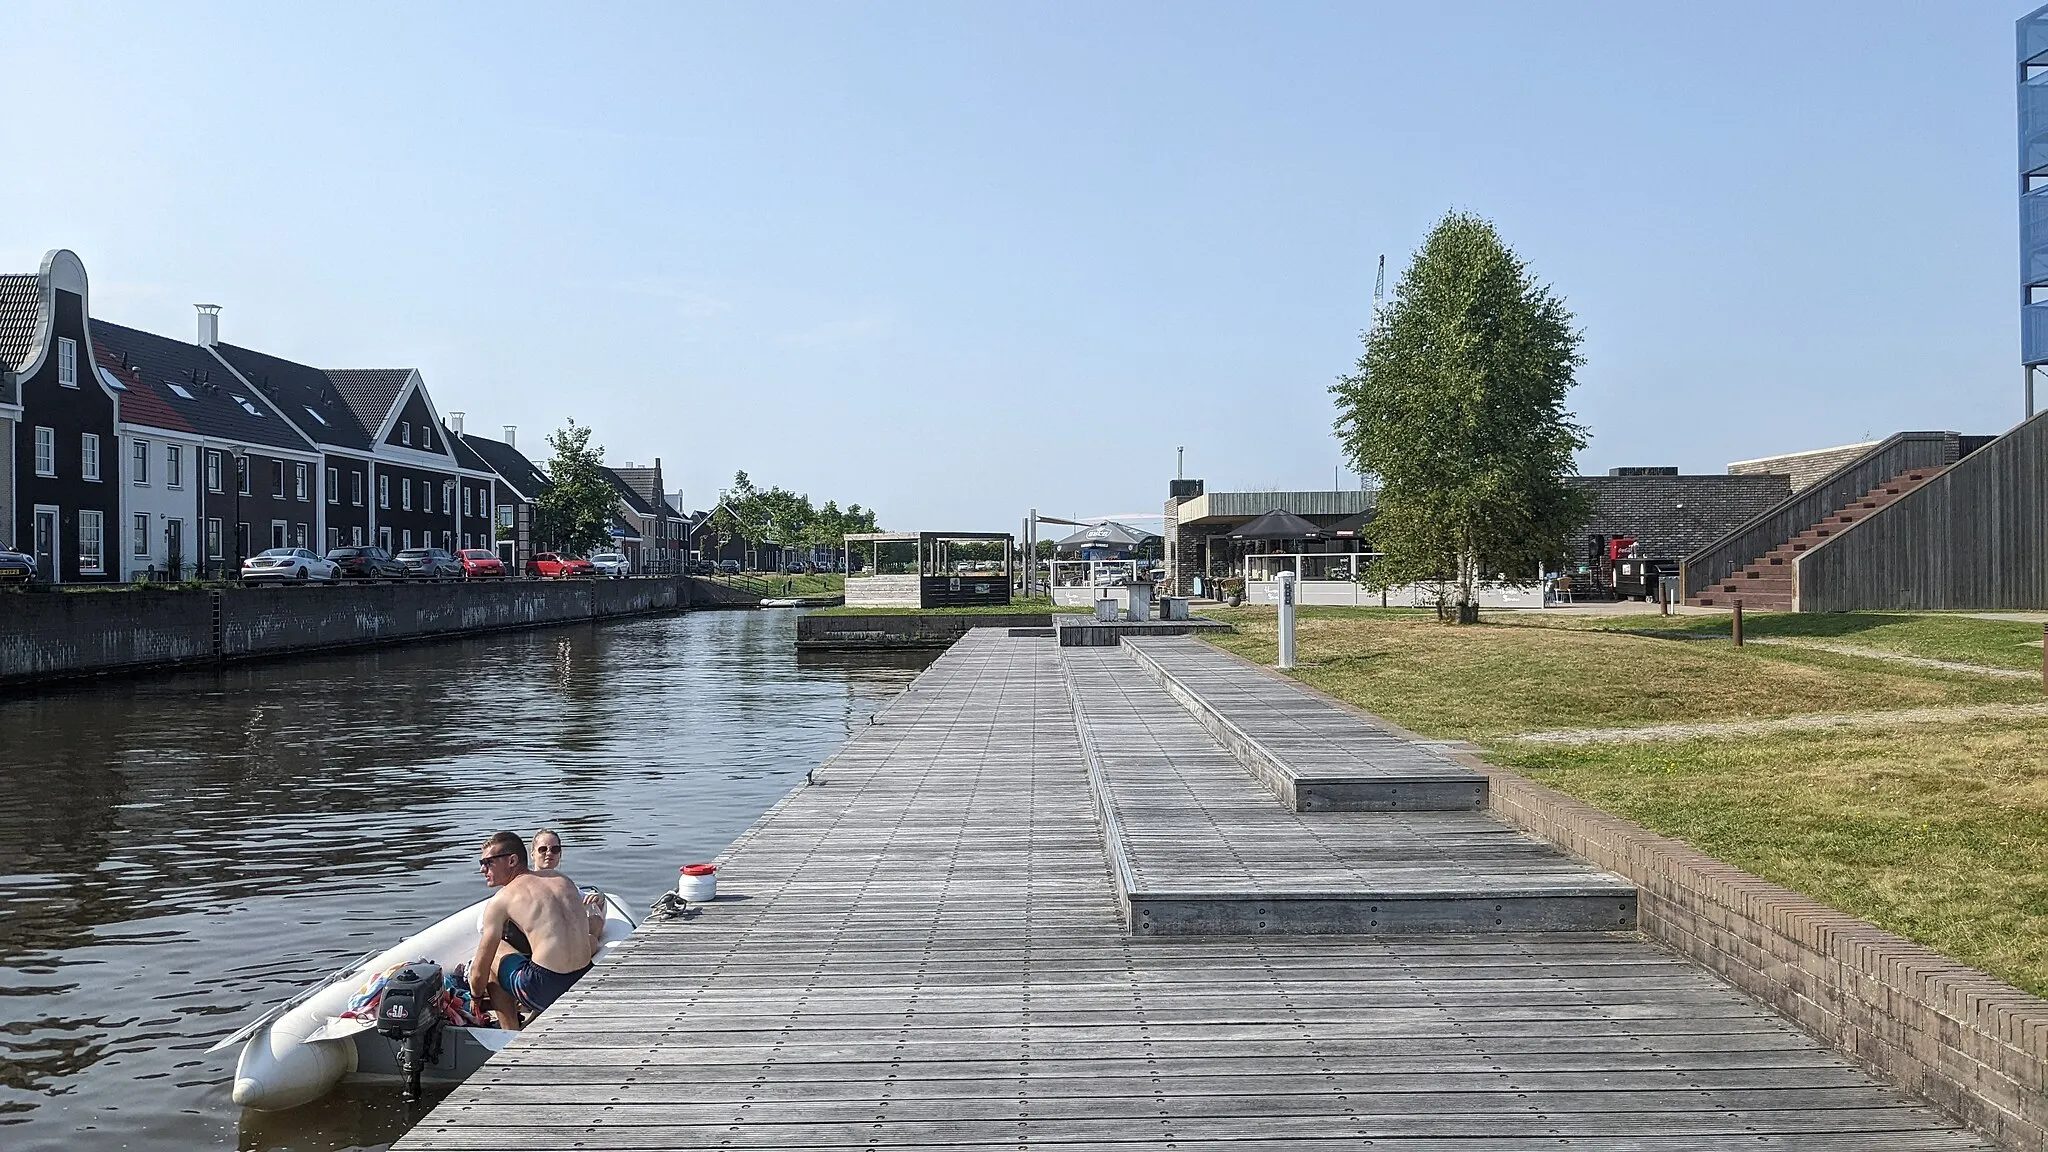 Photo showing: An example of the recreational area of the Groninger village of the Blauwestad, Oldambt during the hottest month of the year with beachgoers and other activities.